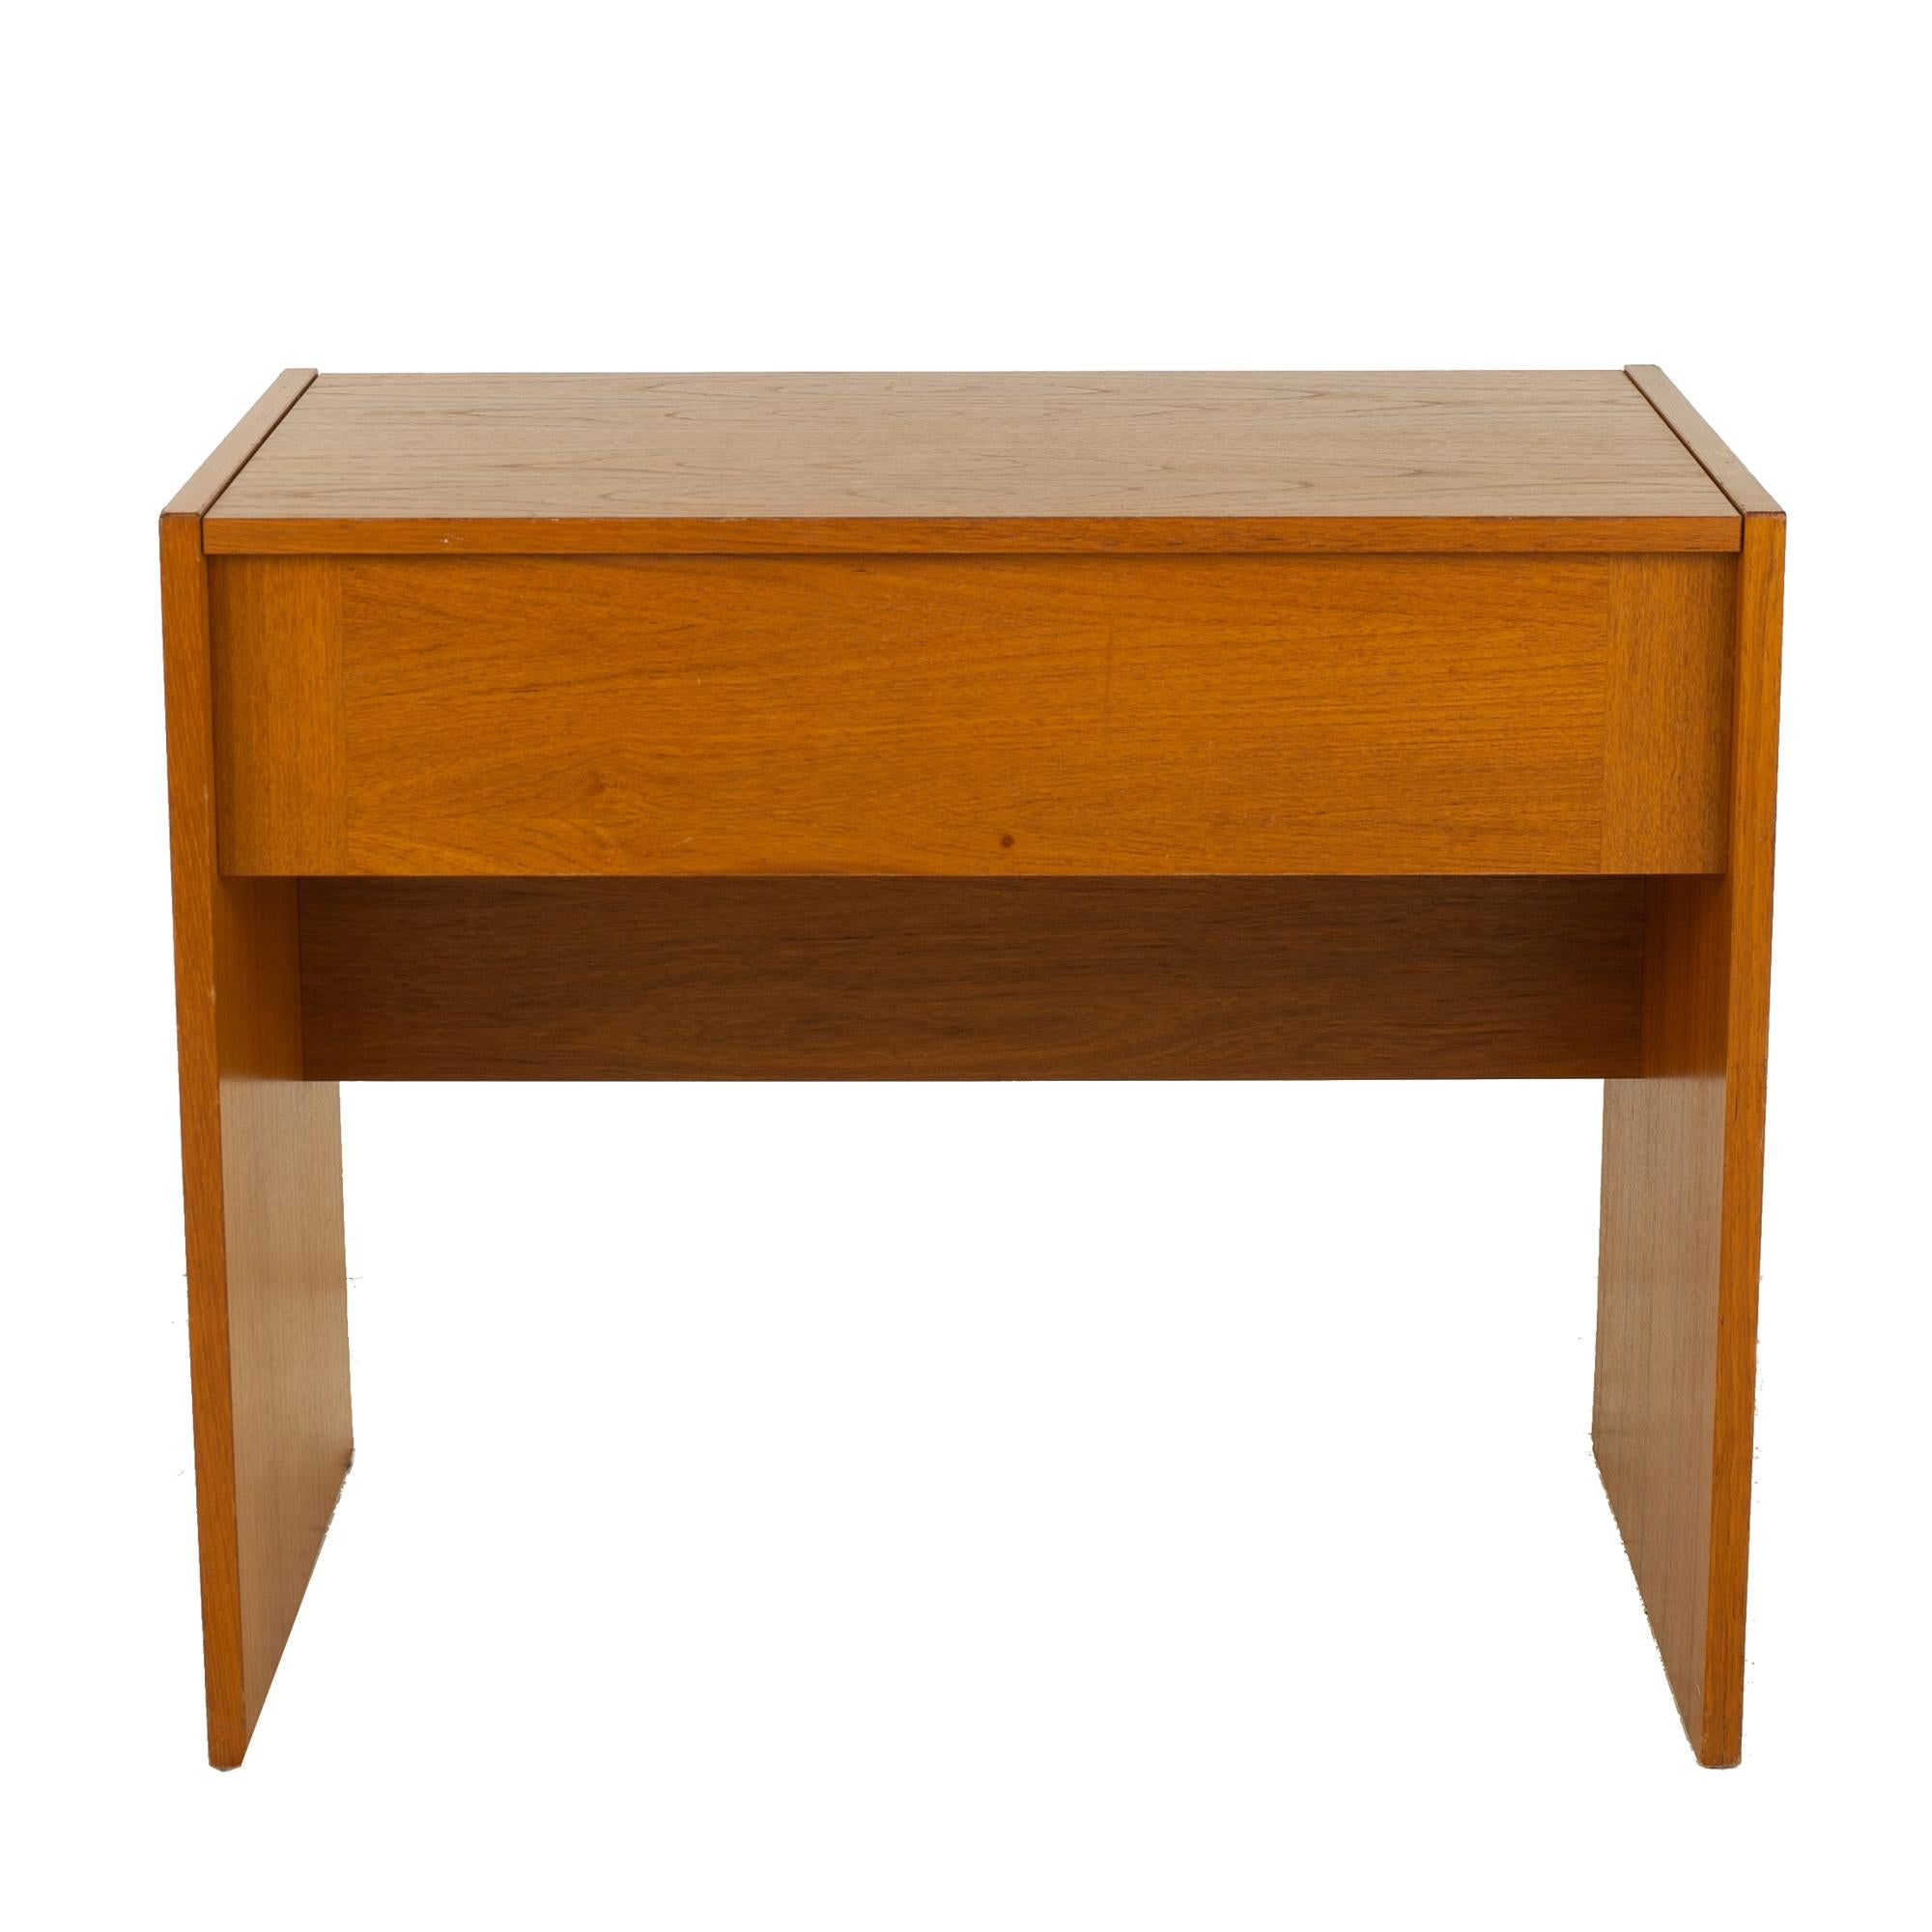 Mid-century teak vanity

This vanity measures: 34 wide x 18 deep x 28.5 inches high.

All pieces of furniture can be had in what we call restored vintage condition. That means the piece is restored upon purchase so it’s free of watermarks, chips